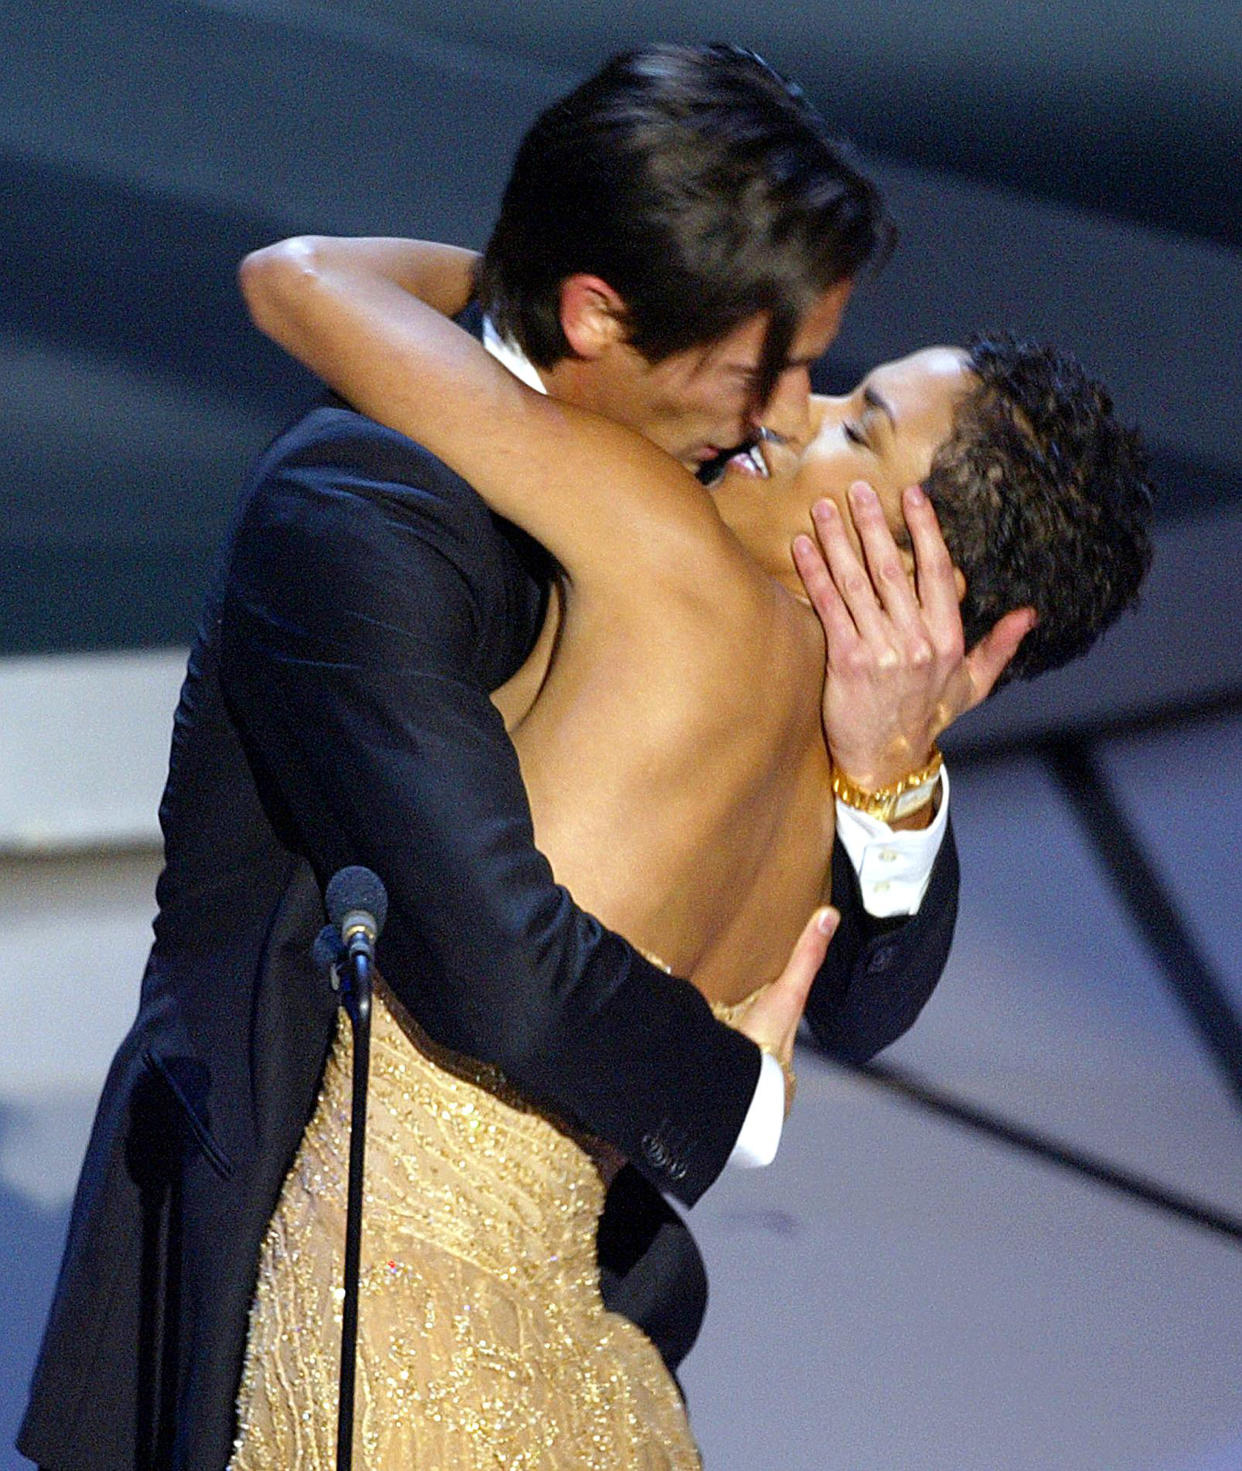 Actor Adrien Brody kisses presenter Actr (Timothy A. Clary / AFP via Getty Images)